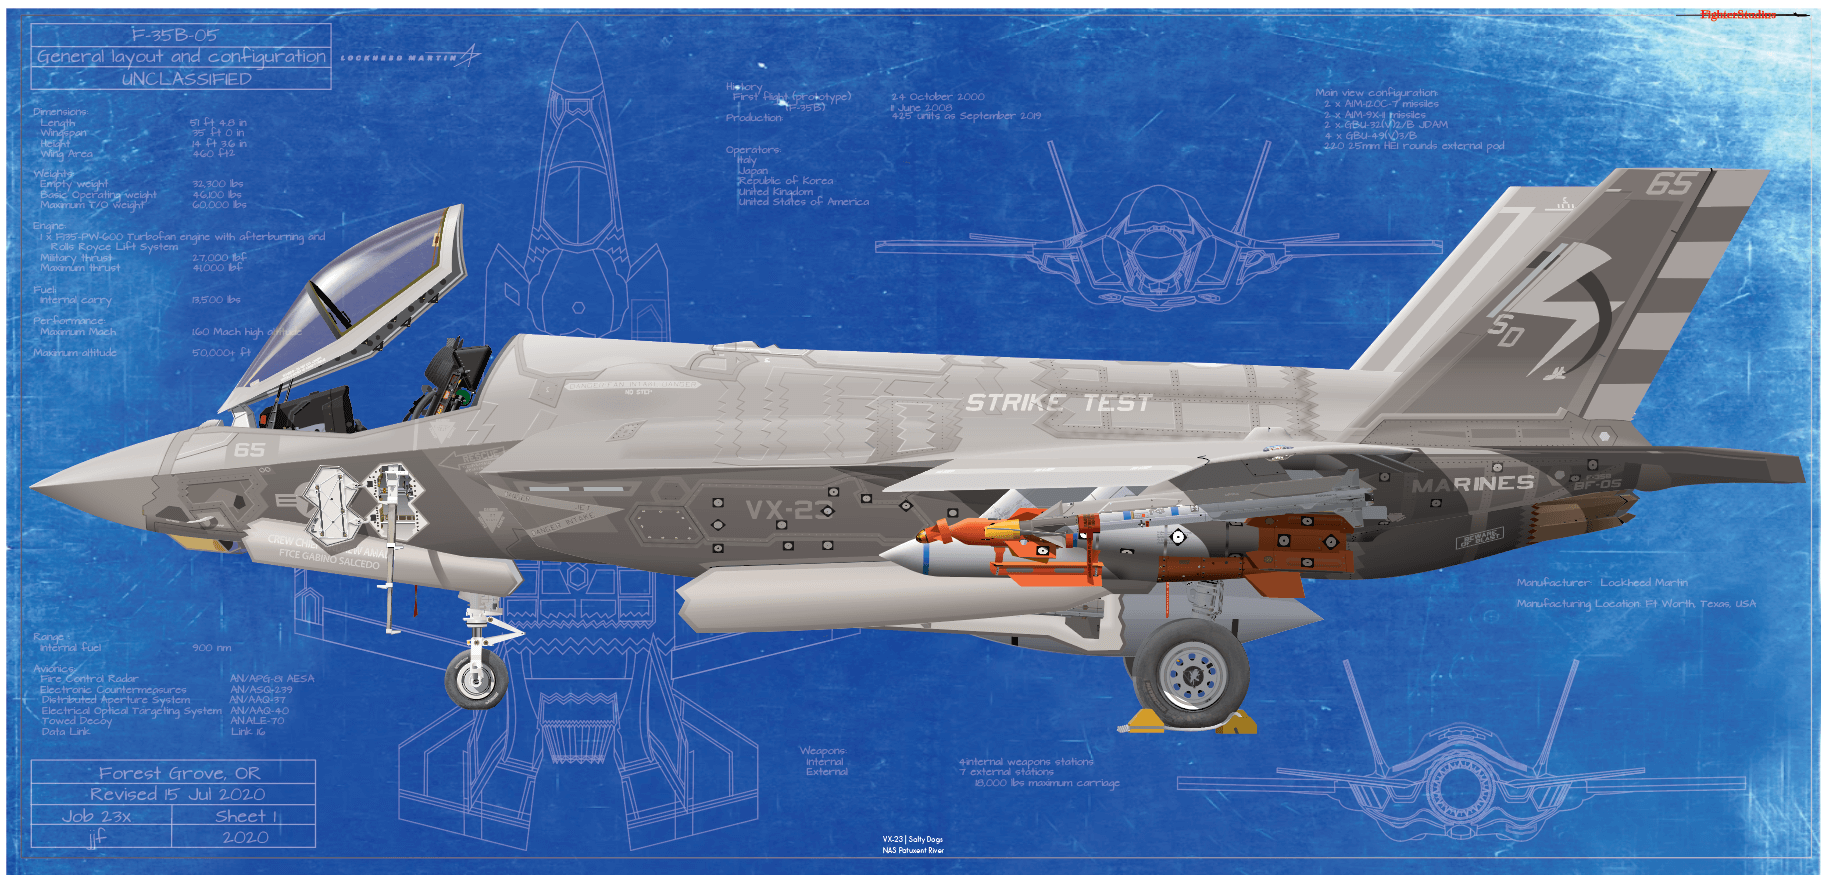 F 35 Lightning Ii Fine Art Aircraft Profile Prints Page 2 Fighter Studios Exceptional Aviation Profile Art